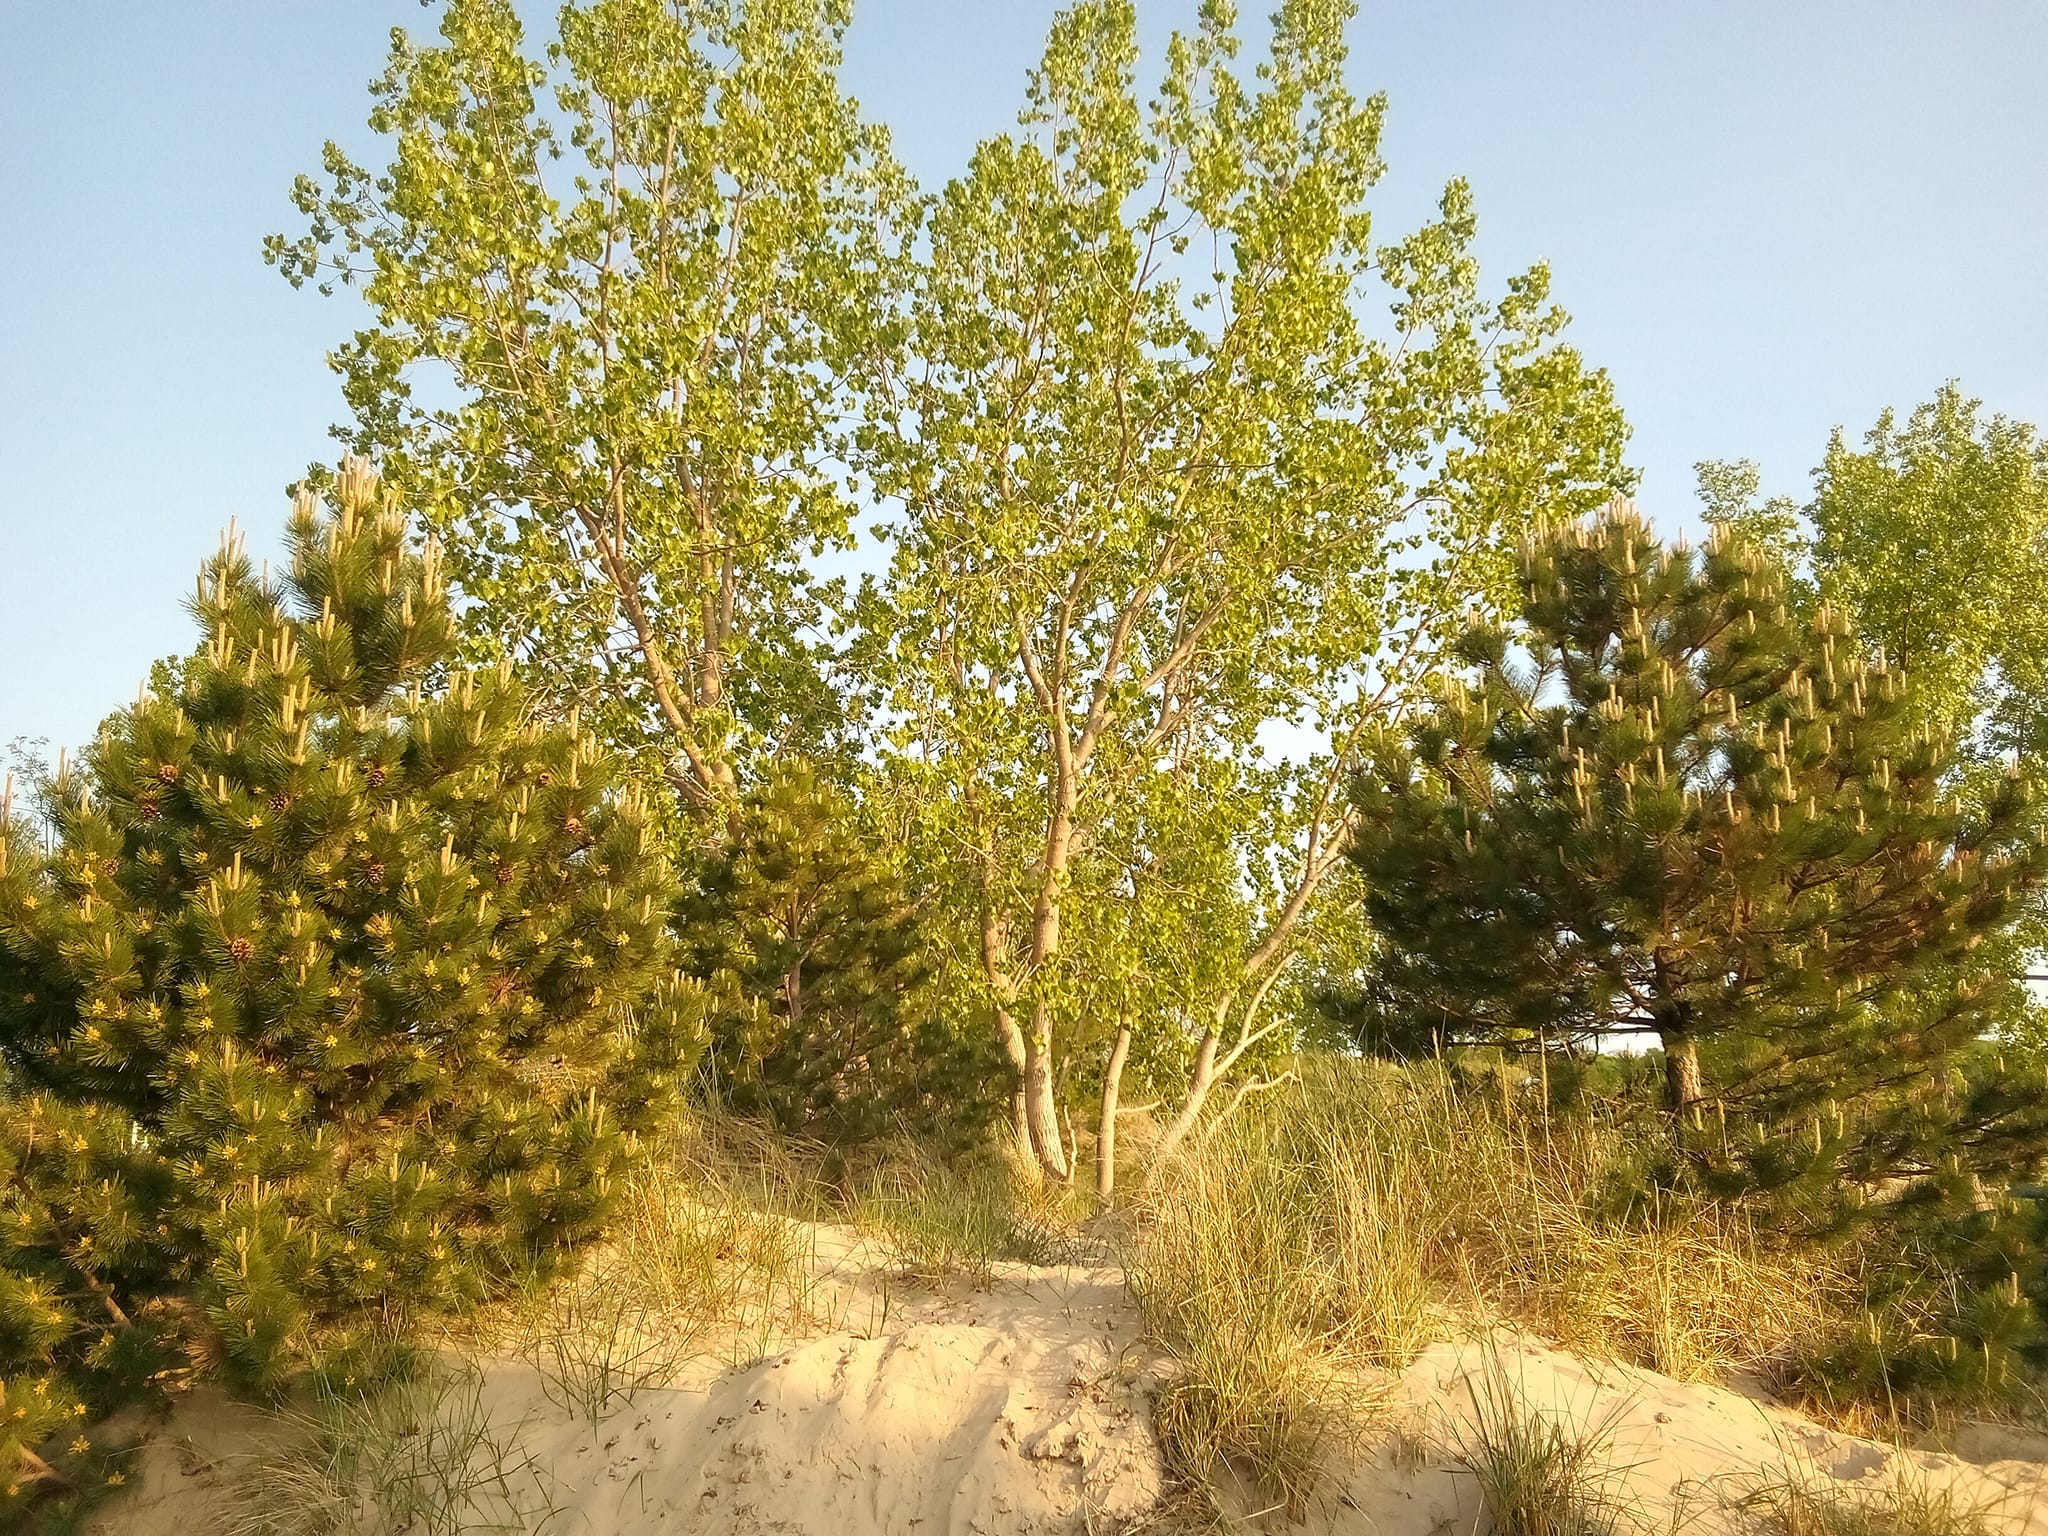 Beach Dune with Trees, Pines, Grasses